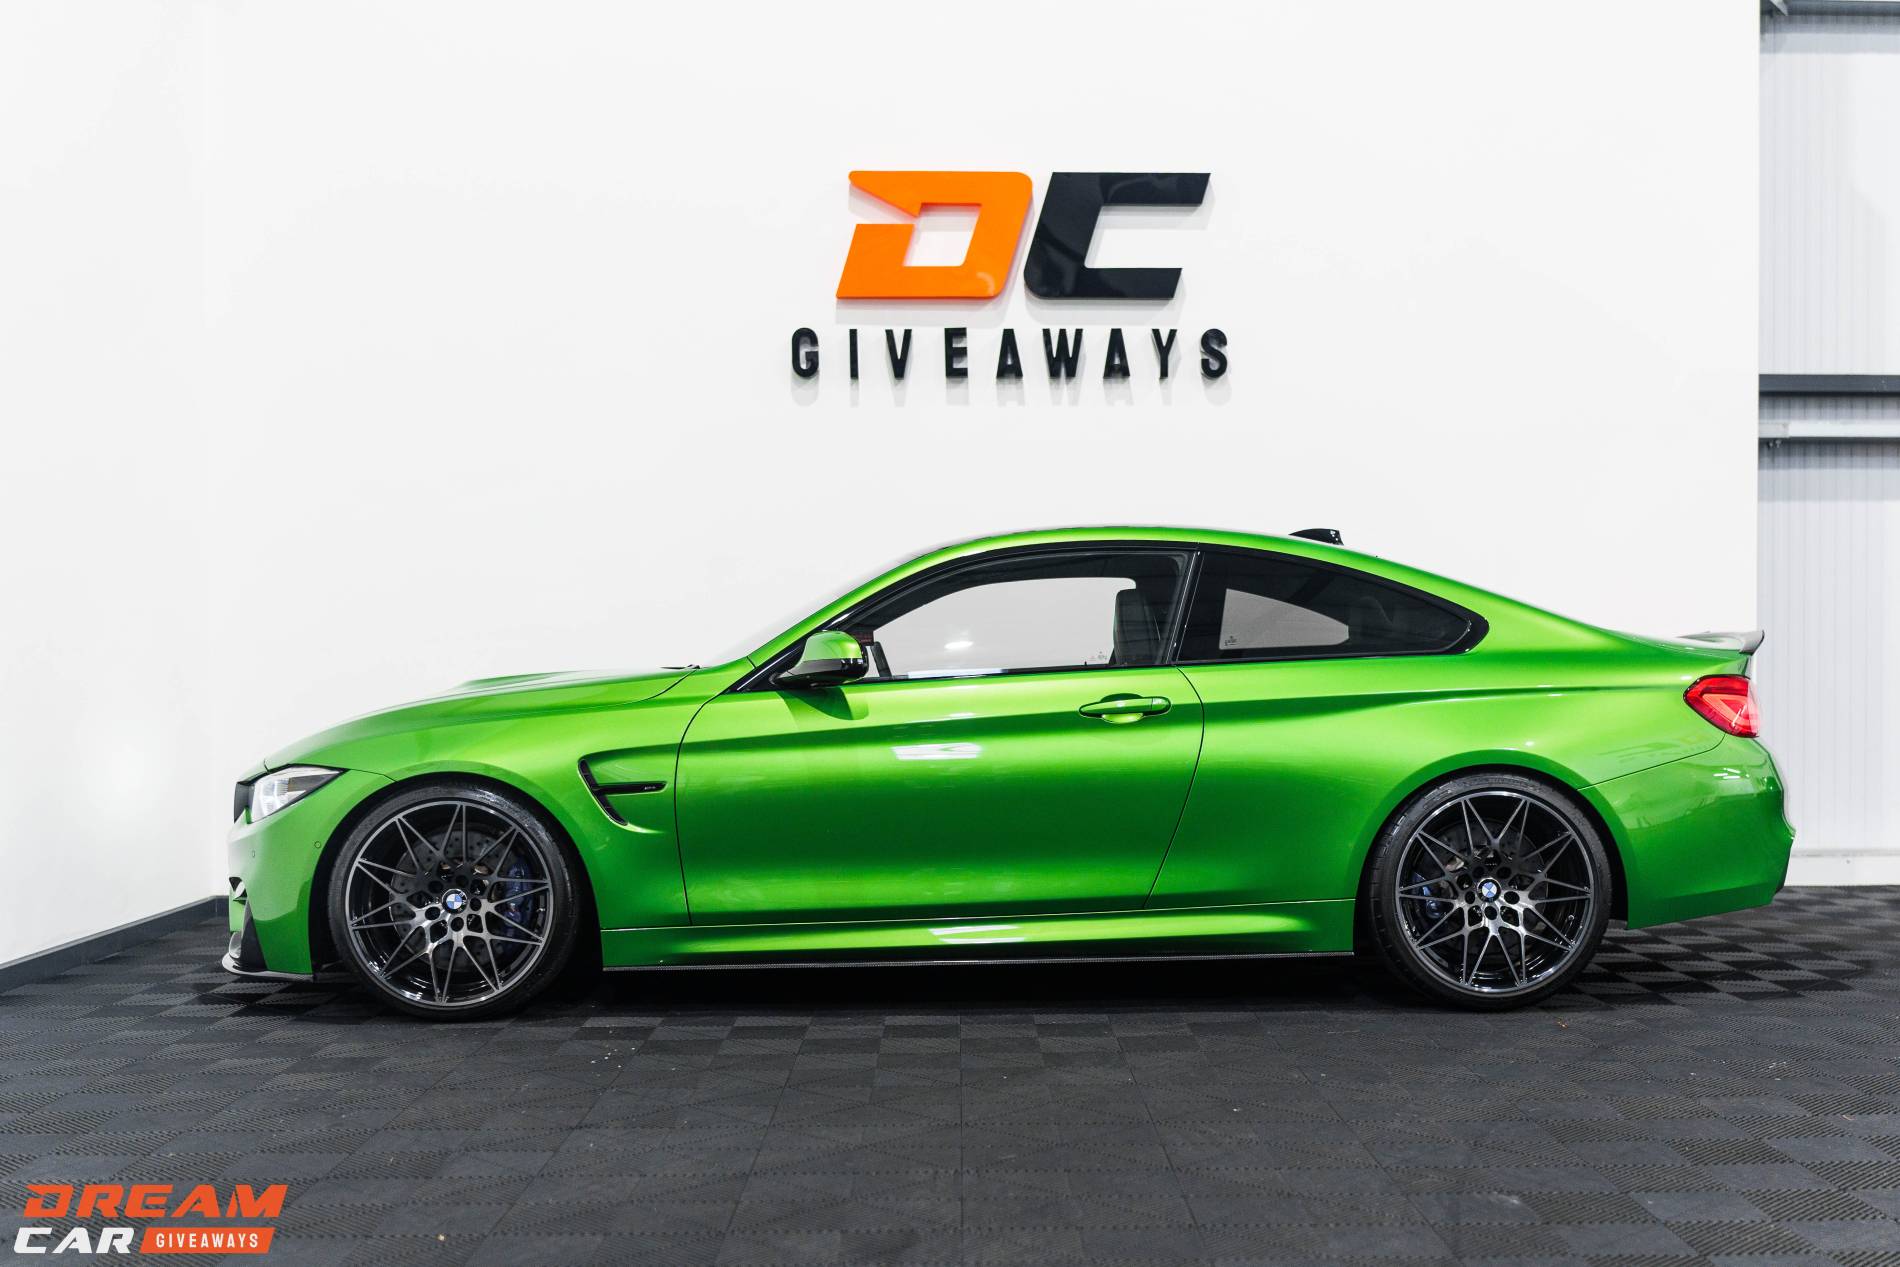 Win this BMW M4 Competition & £1,000 or £30,000 Tax Free